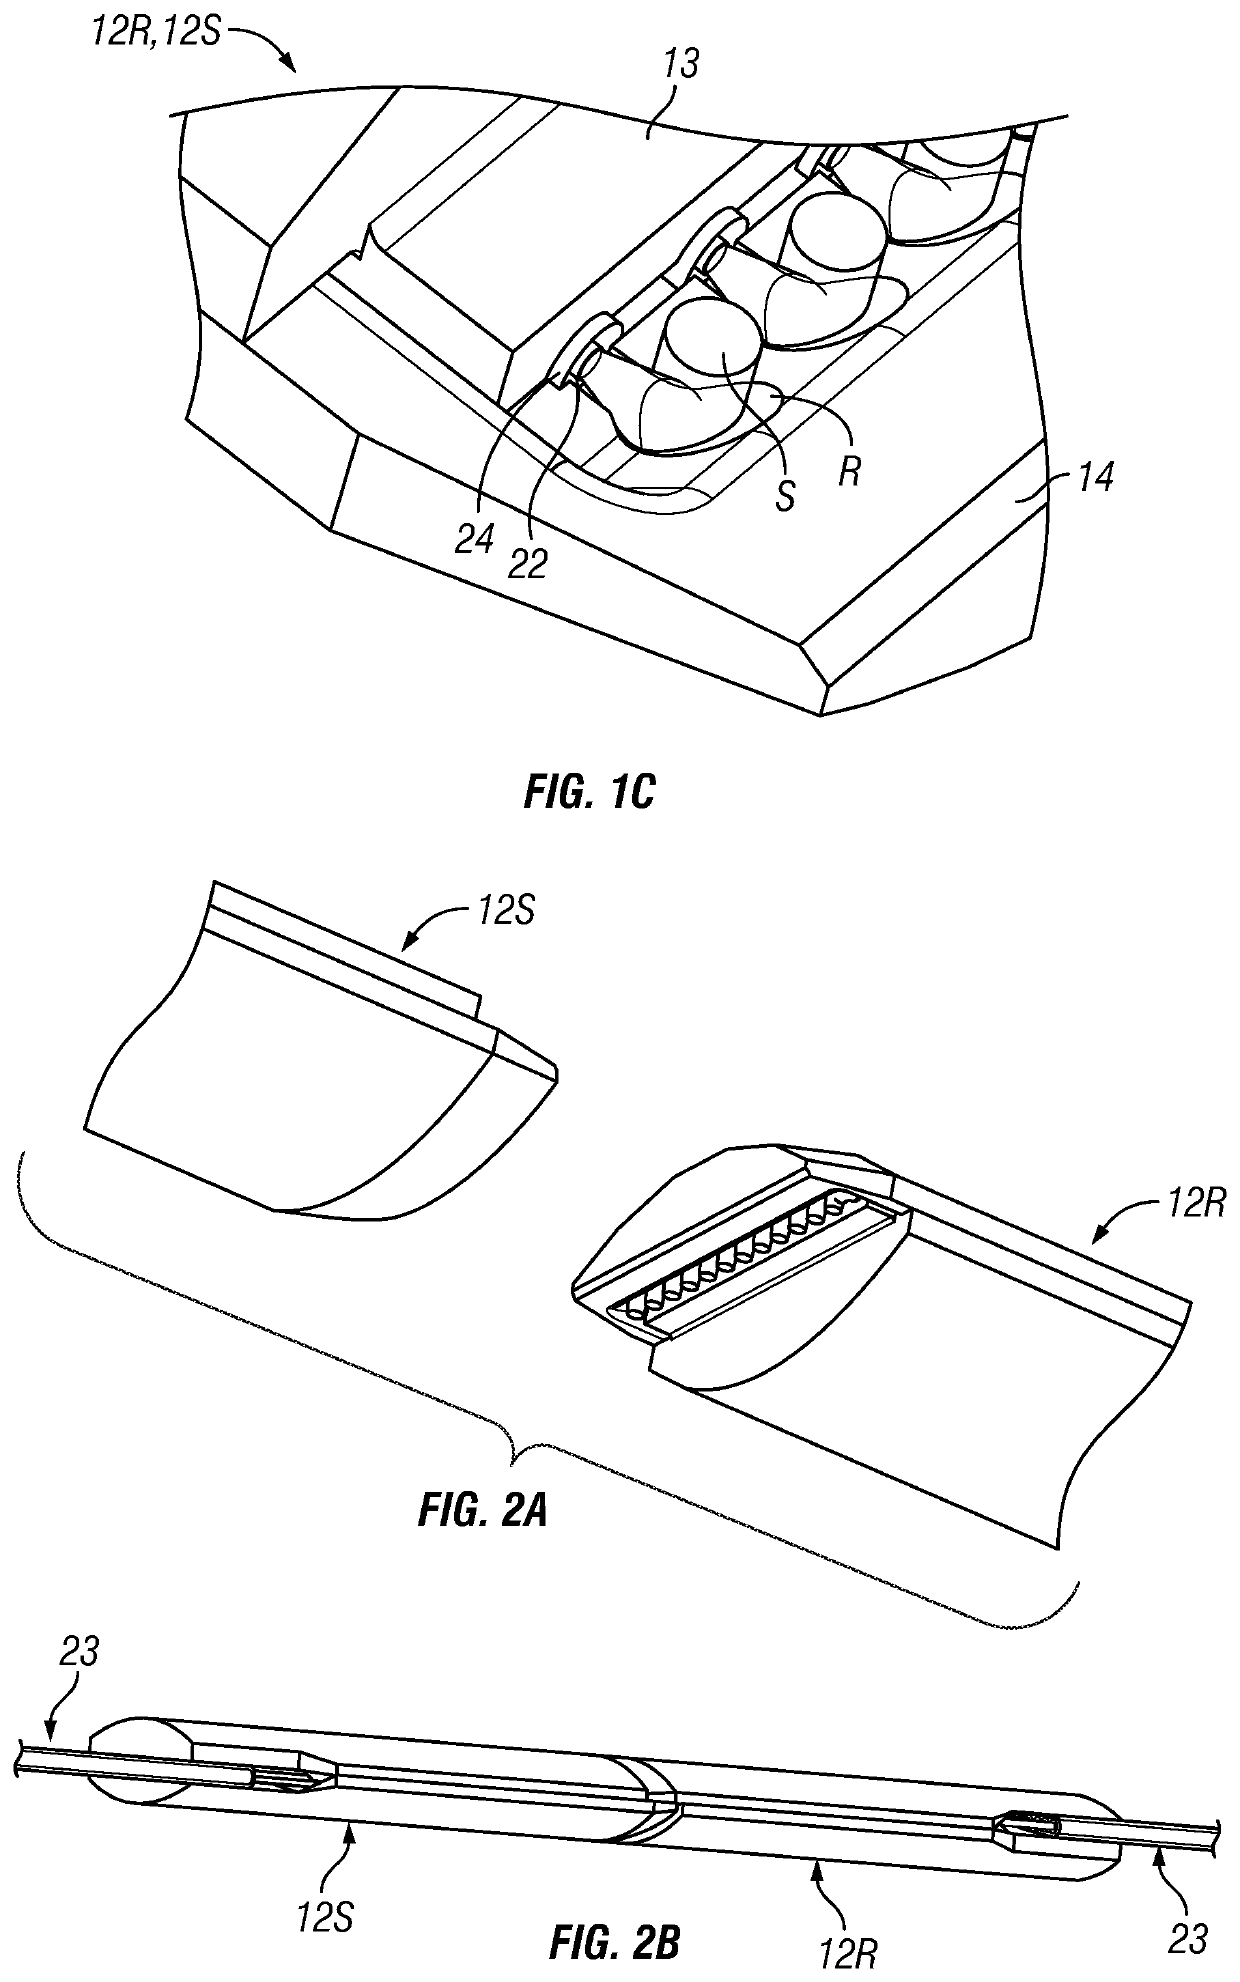 Optical fiber connector ferrule assembly having single reflective surface for beam expansion and expanded beam connector incorporating same